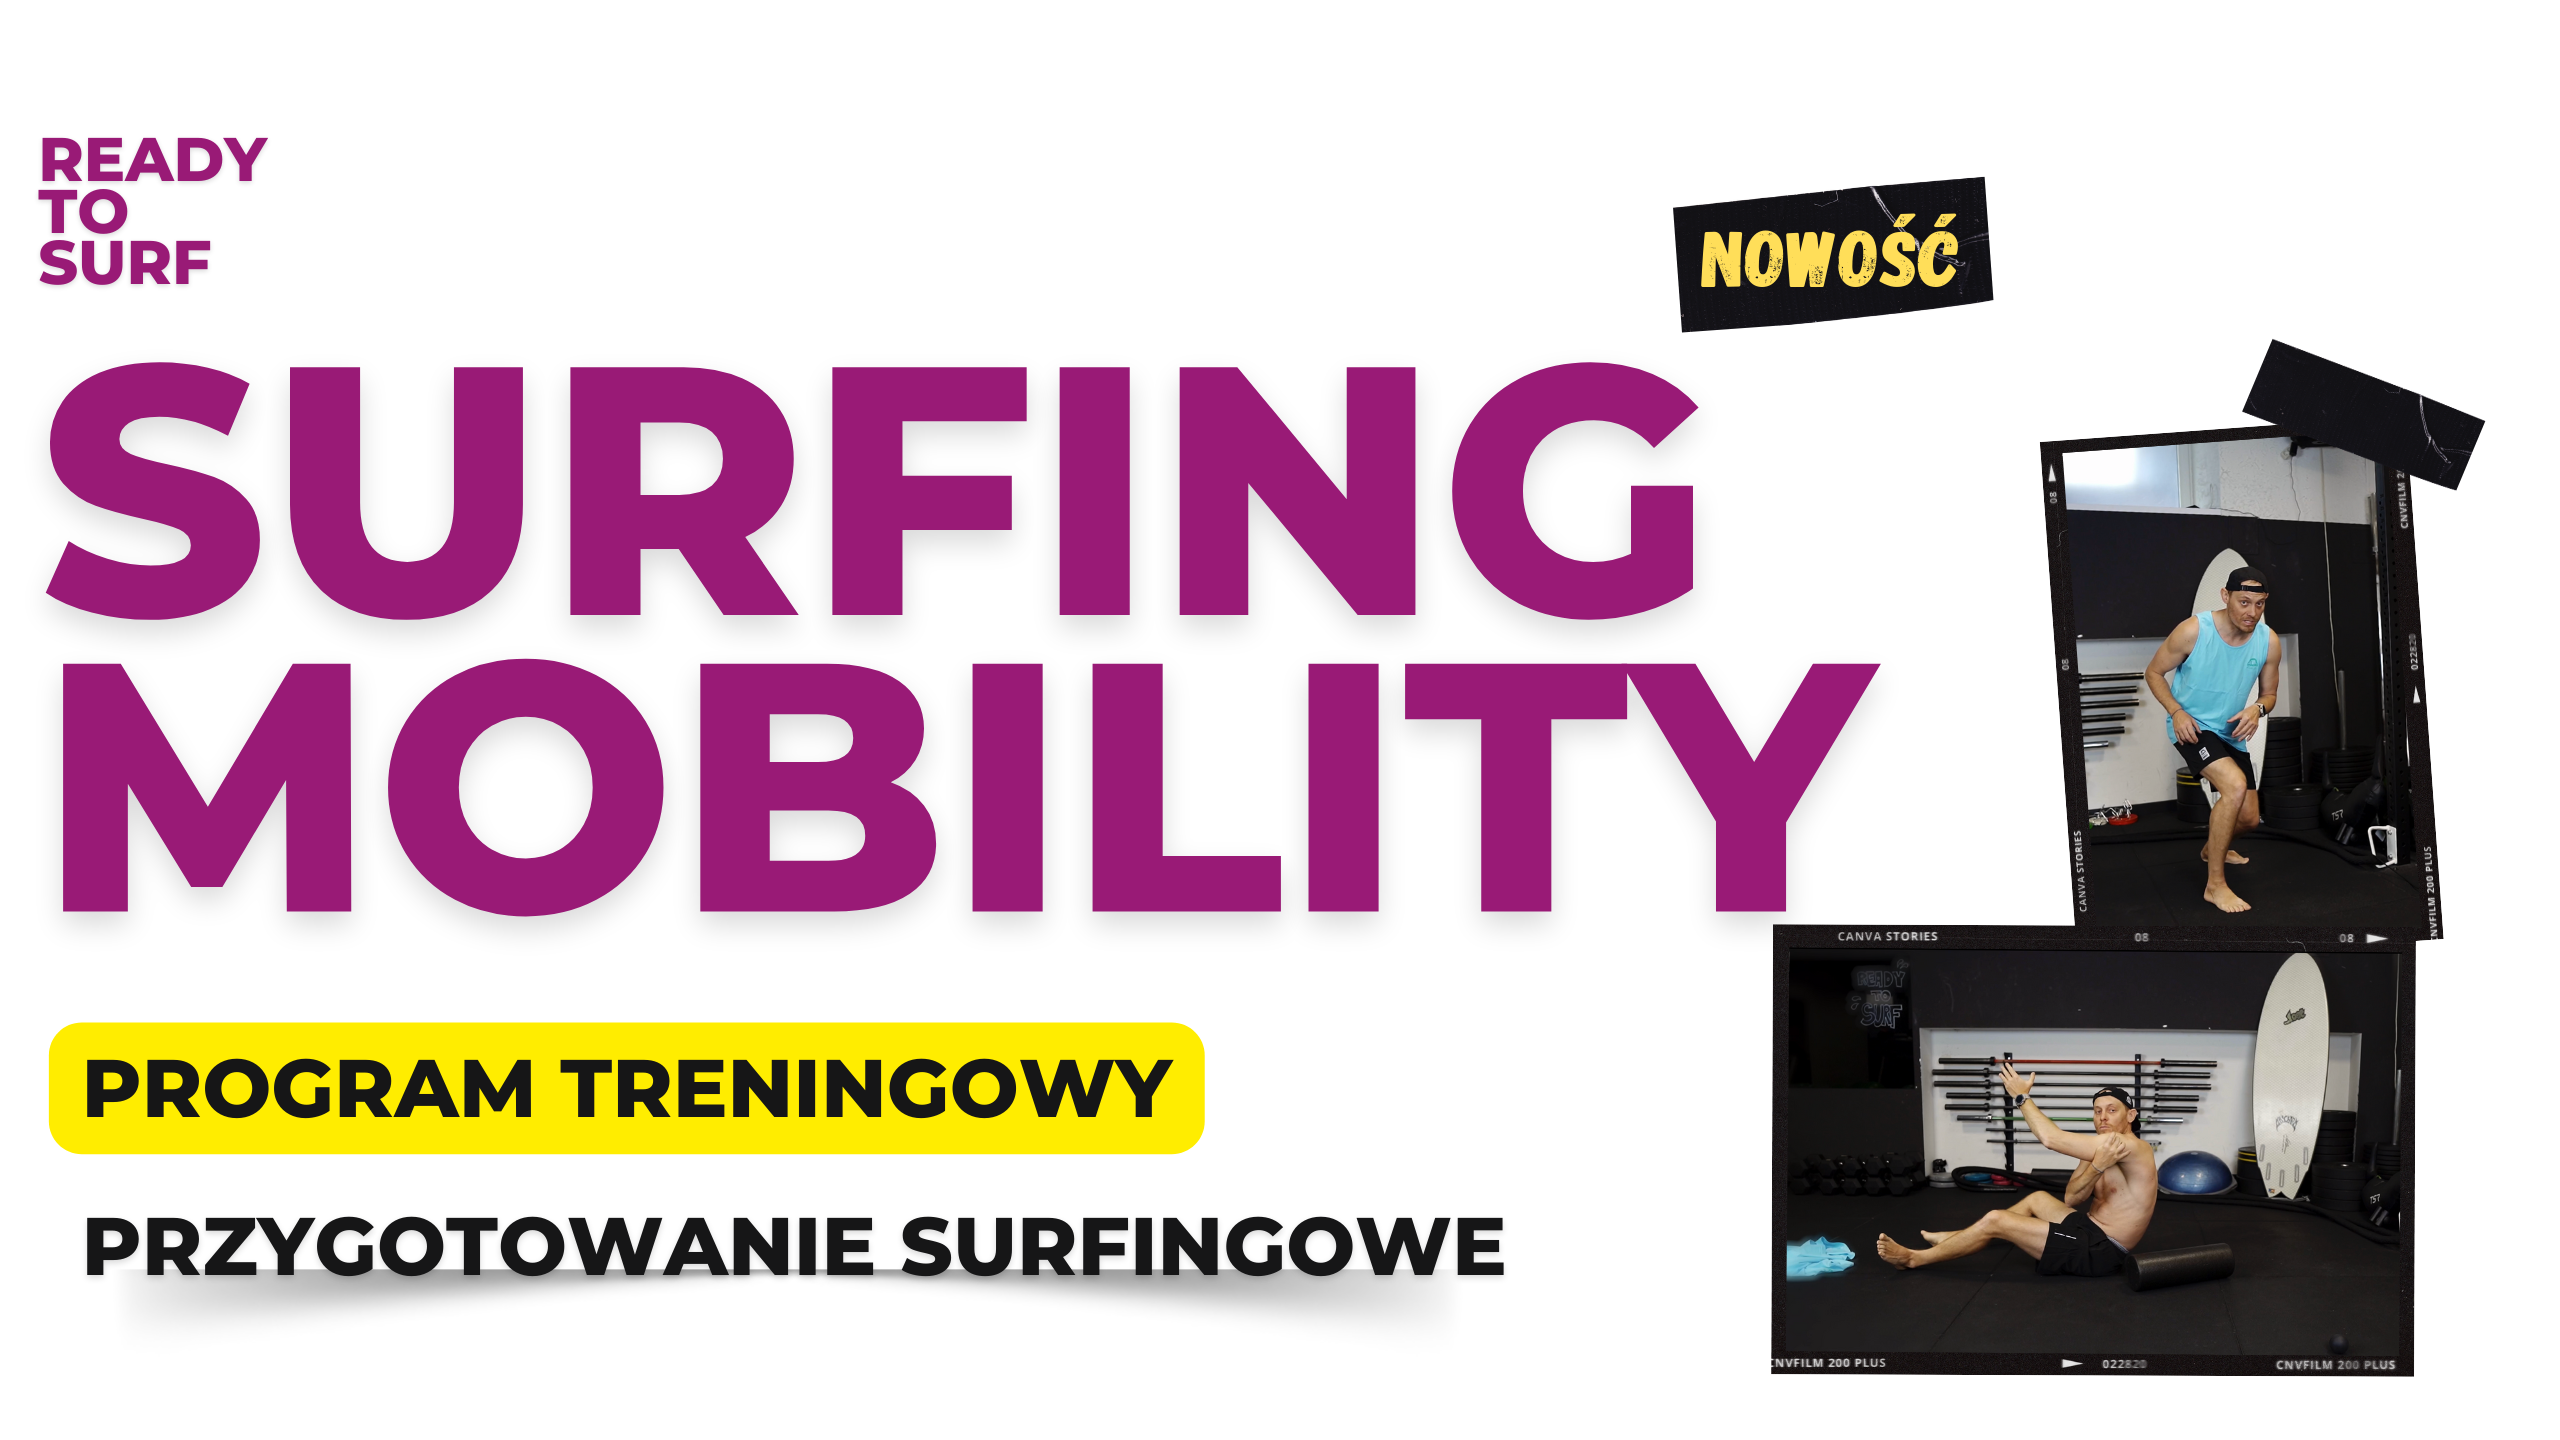 SURFING MOBILITY – READY TO SURF